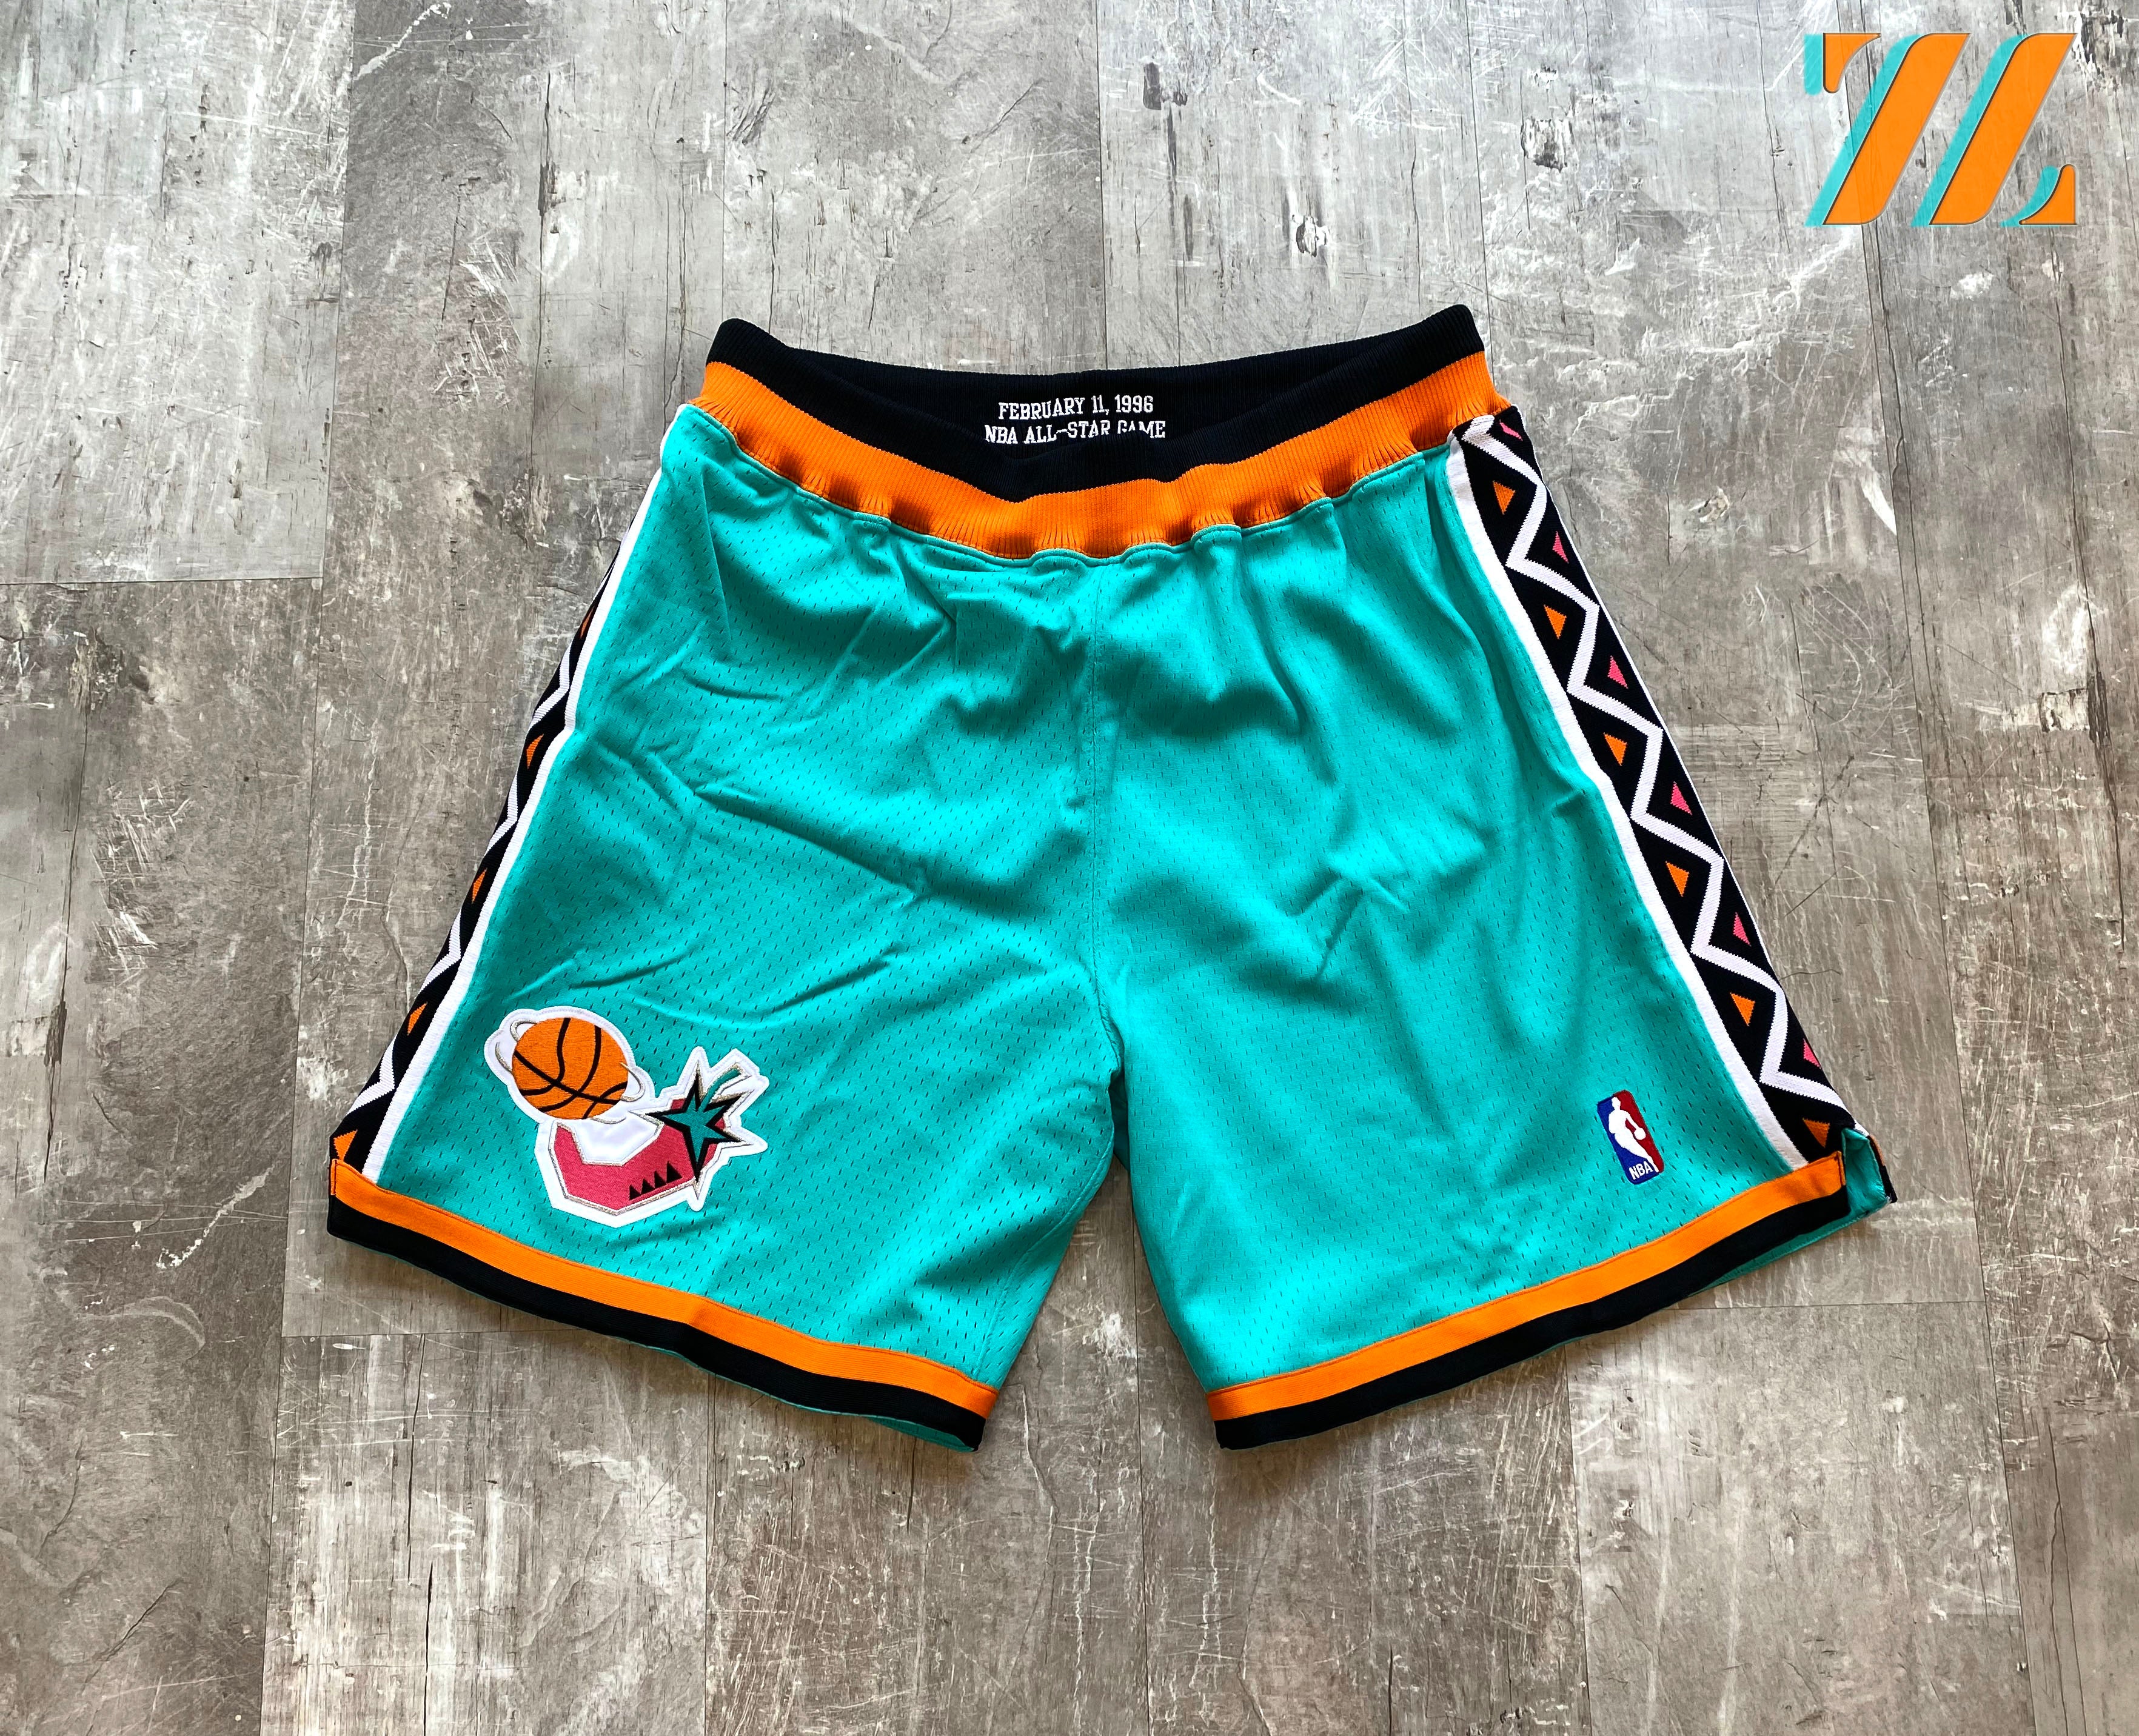 Mitchell Ness 1996-97 NBA All Stars Authentic Shorts 2XL at  Men's  Clothing store